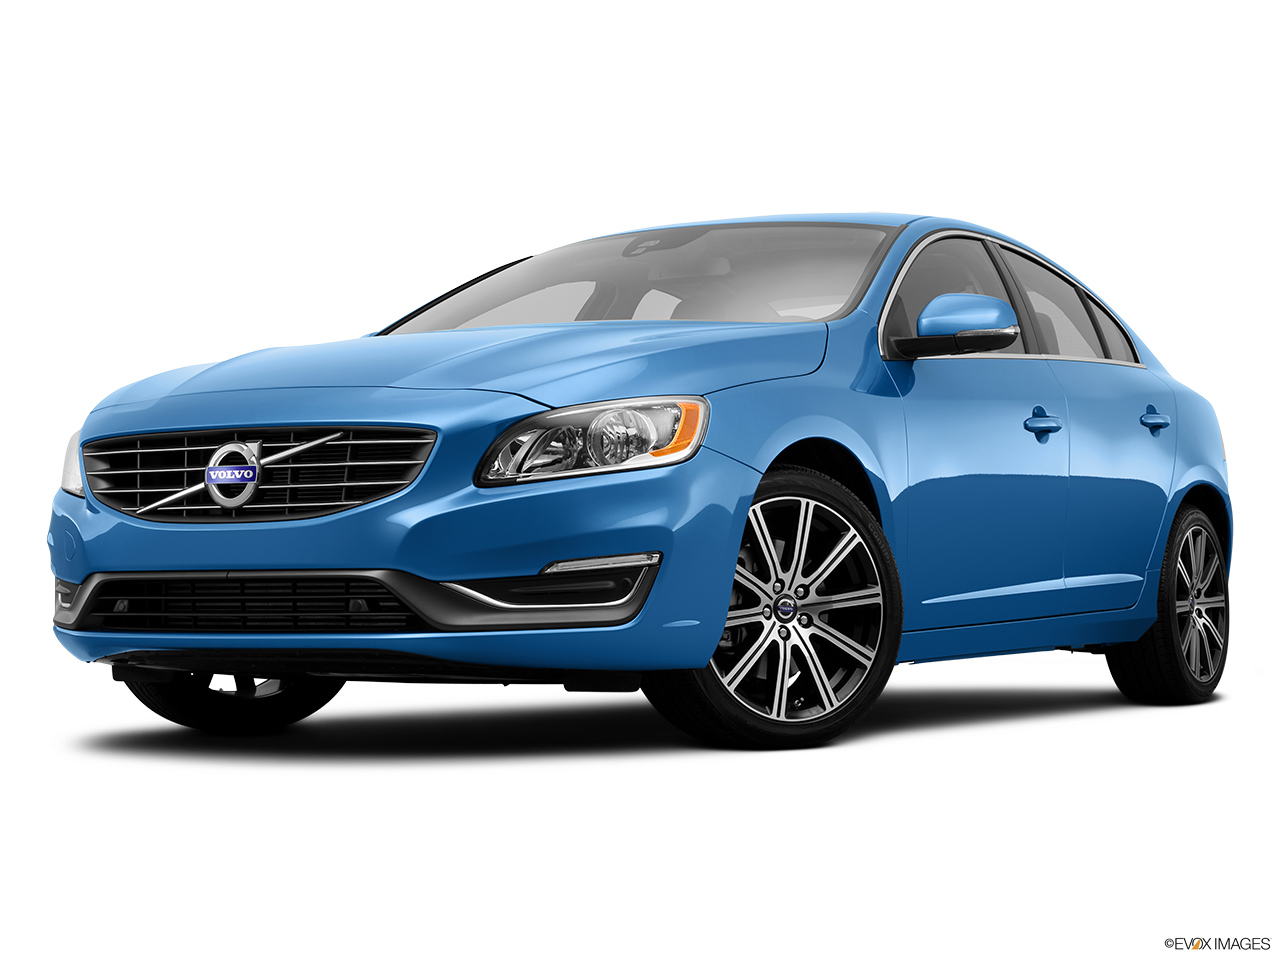 2014 Volvo S60 T5 FWD Premier Plus Front angle view, low wide perspective. 